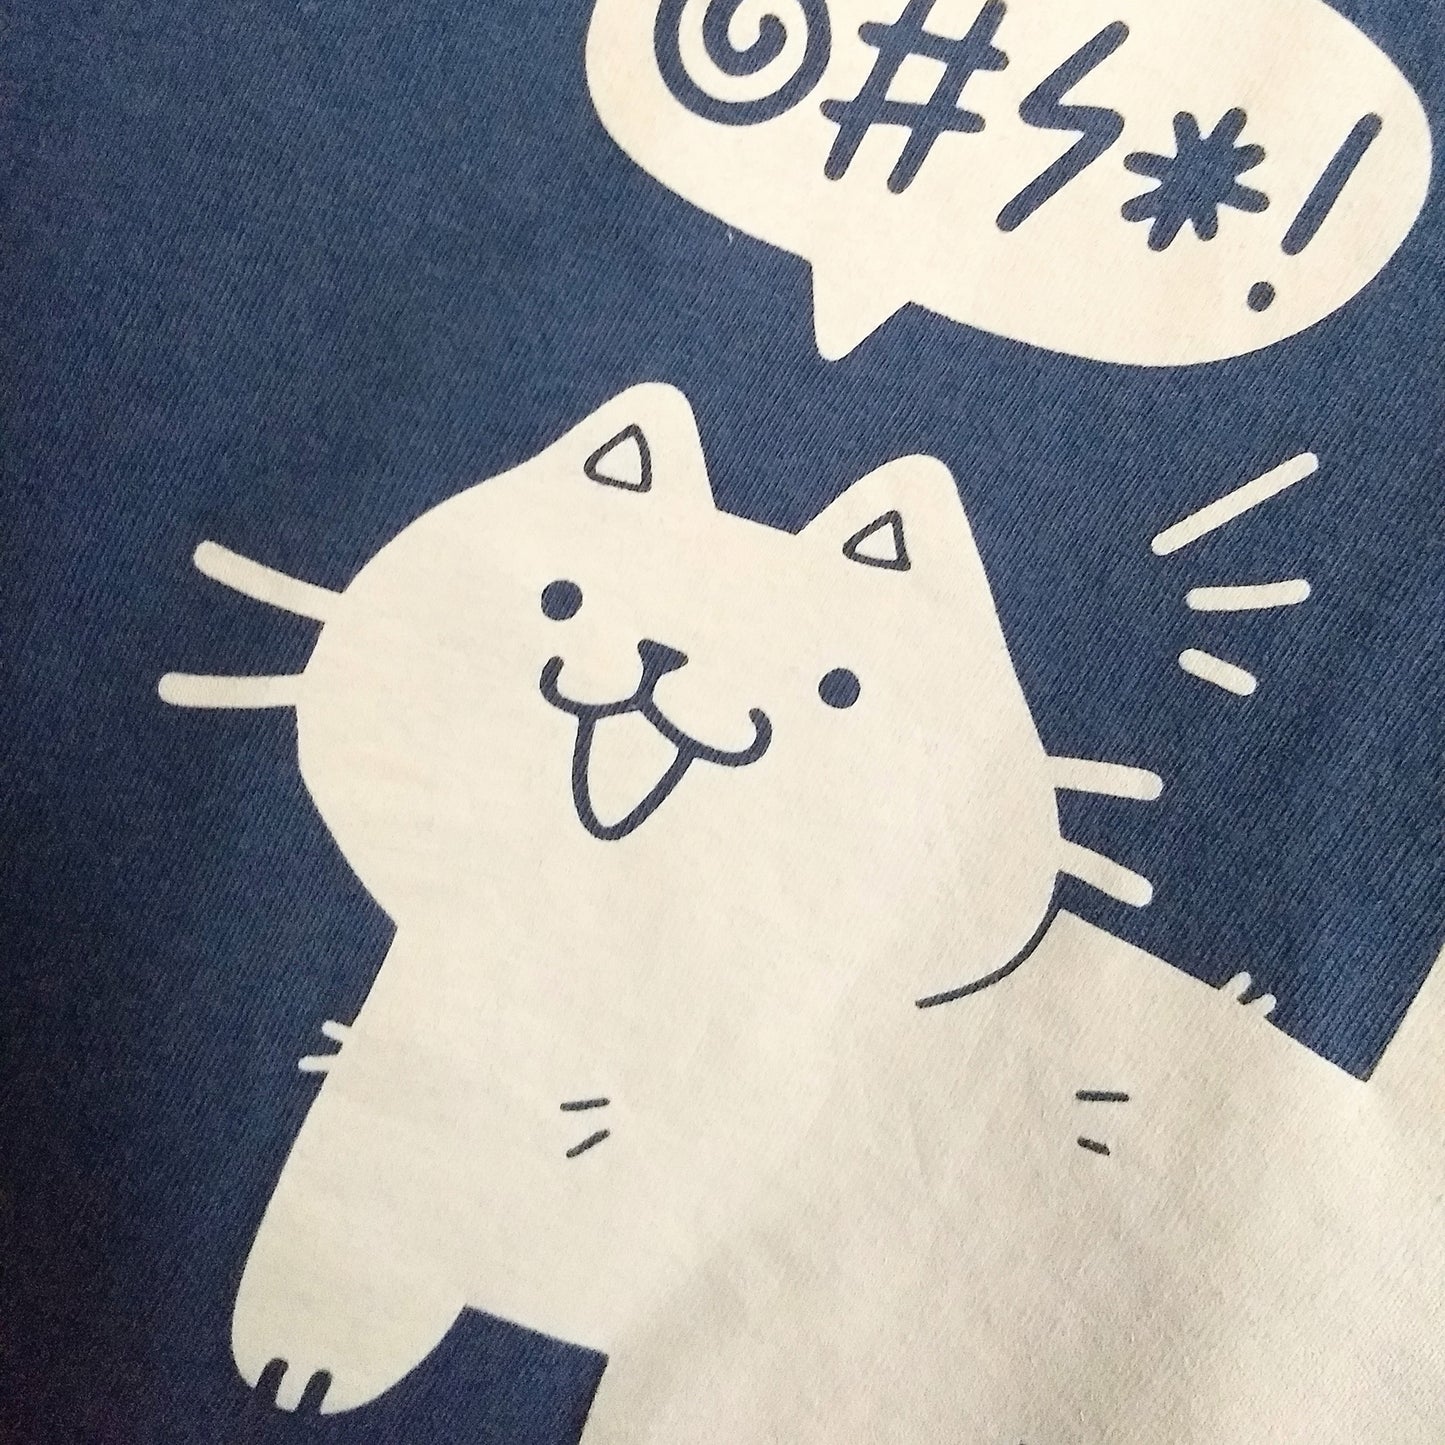 Closeup of the white printed cat and speech bubble on the t-shirt.